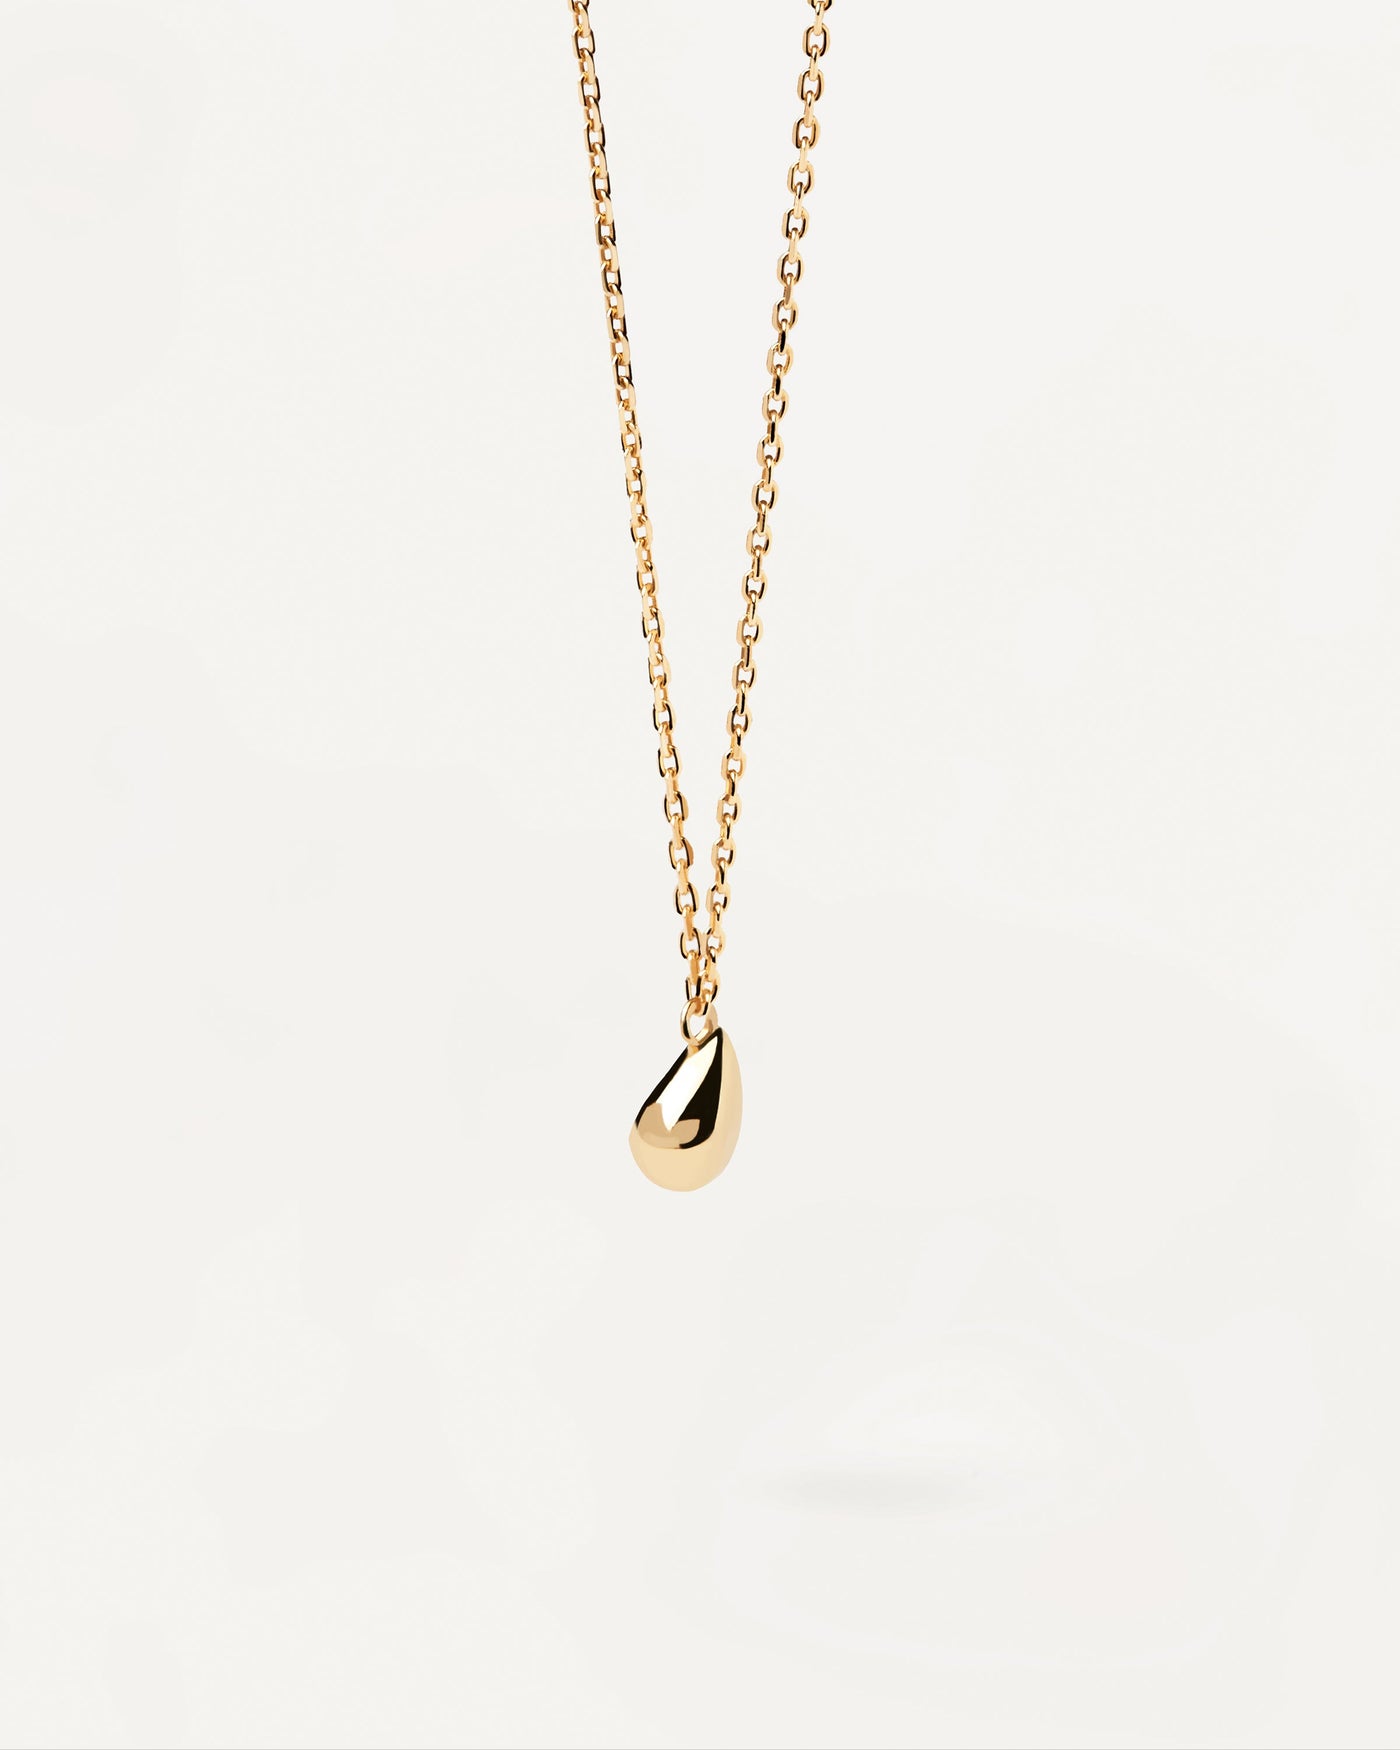 2023 Selection | Drop Necklace. Gold-plated silver necklace with drop shape pendant. Get the latest arrival from PDPAOLA. Place your order safely and get this Best Seller. Free Shipping.